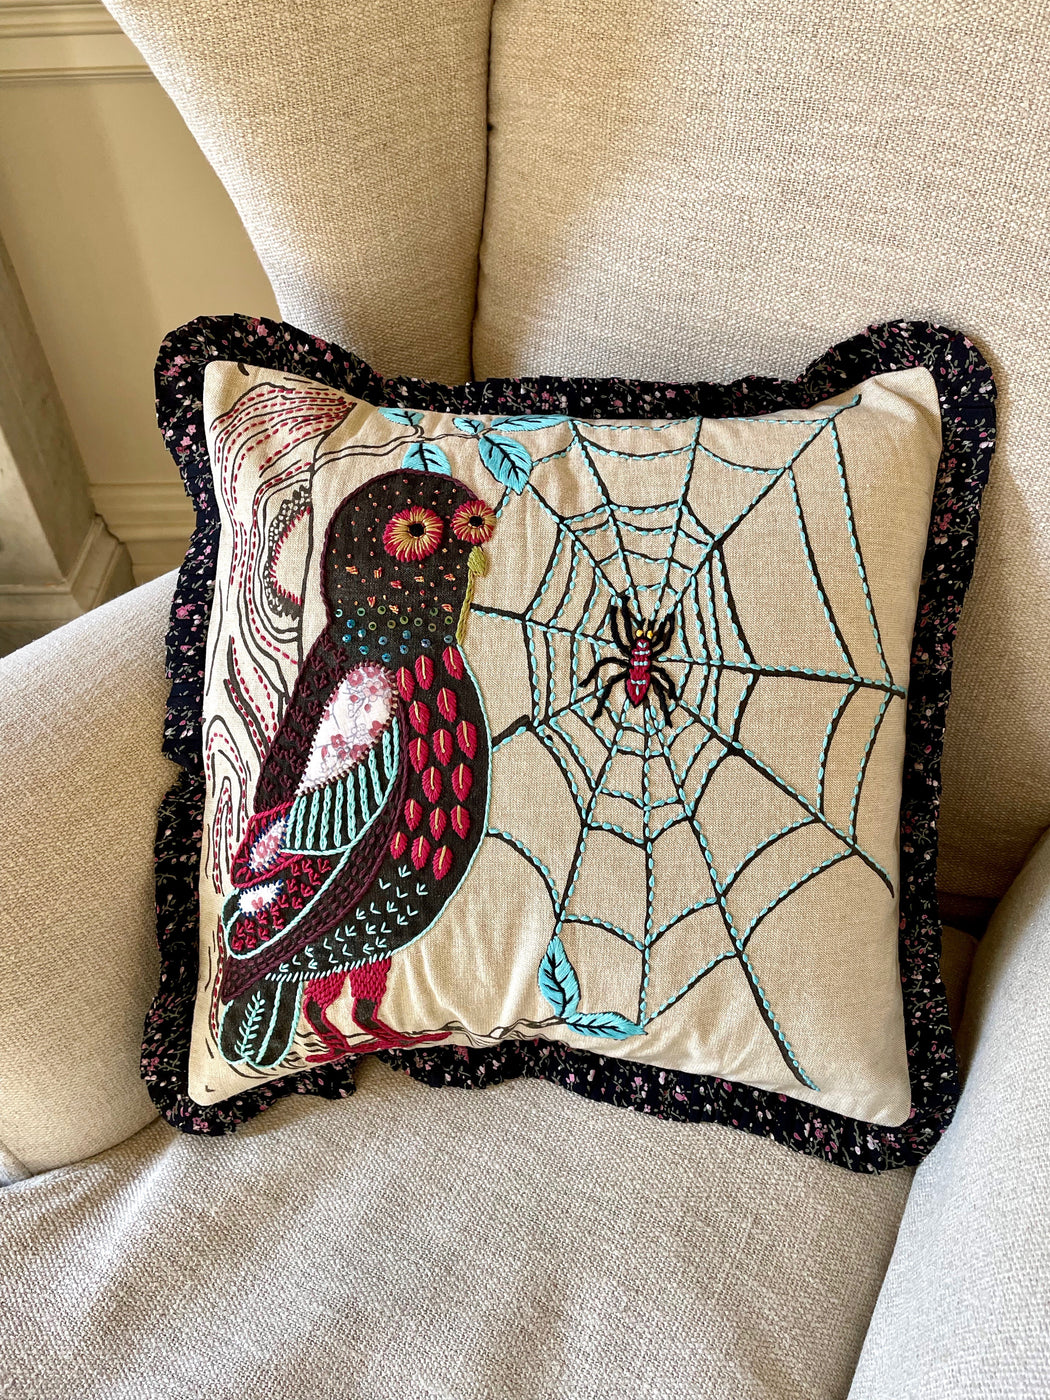 Nathalie Lete Hand-Embroidered "Owl" Pillow